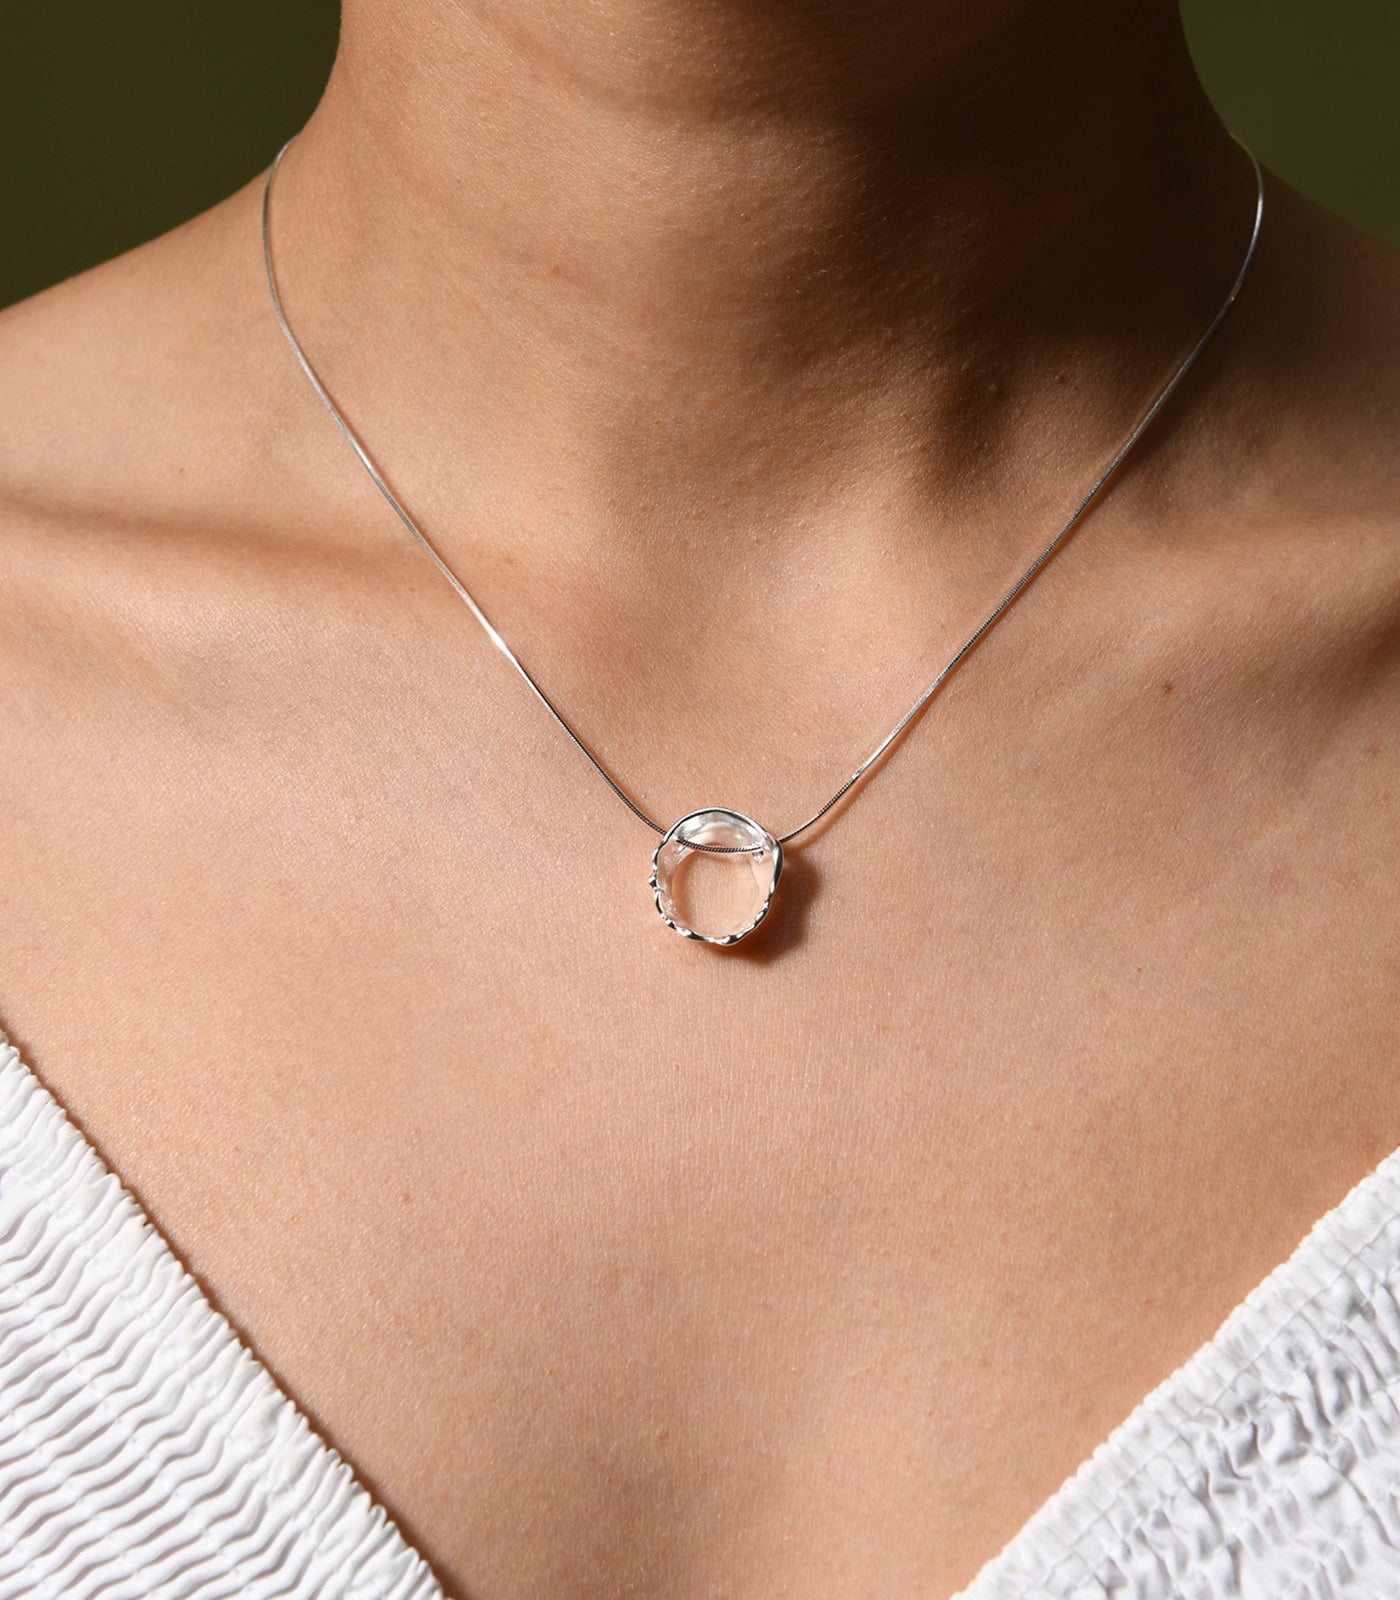 A sterling silver necklace with an irregular shaped circle pendant. The pendant is reflective of waters movements.